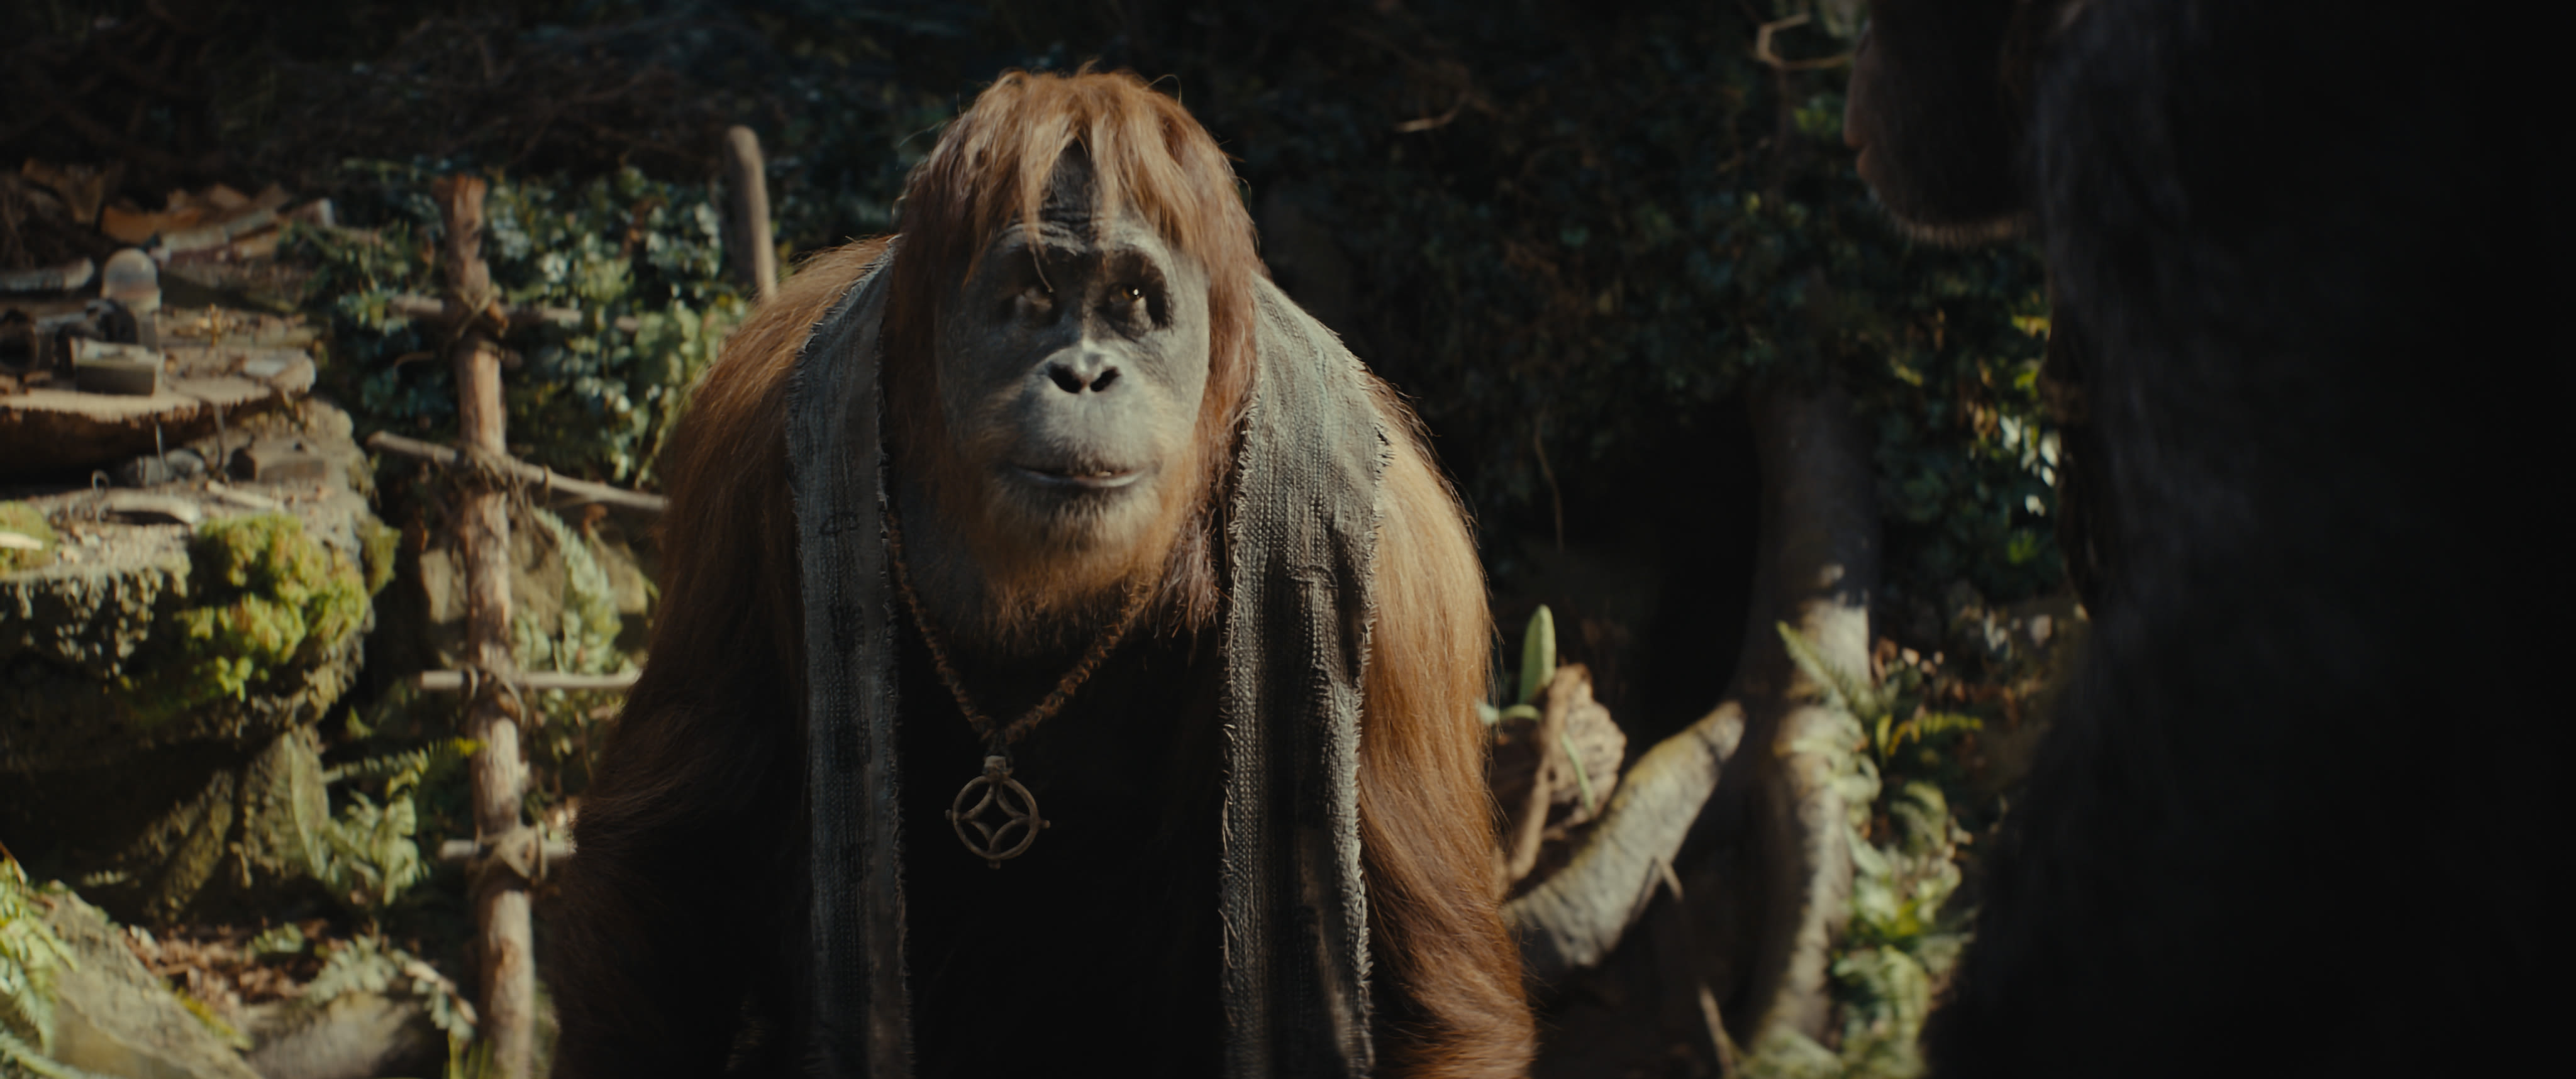 ‘Kingdom Of The Planet Of The Apes’ Solid Previews Around $6M – Thursday Night Box Office